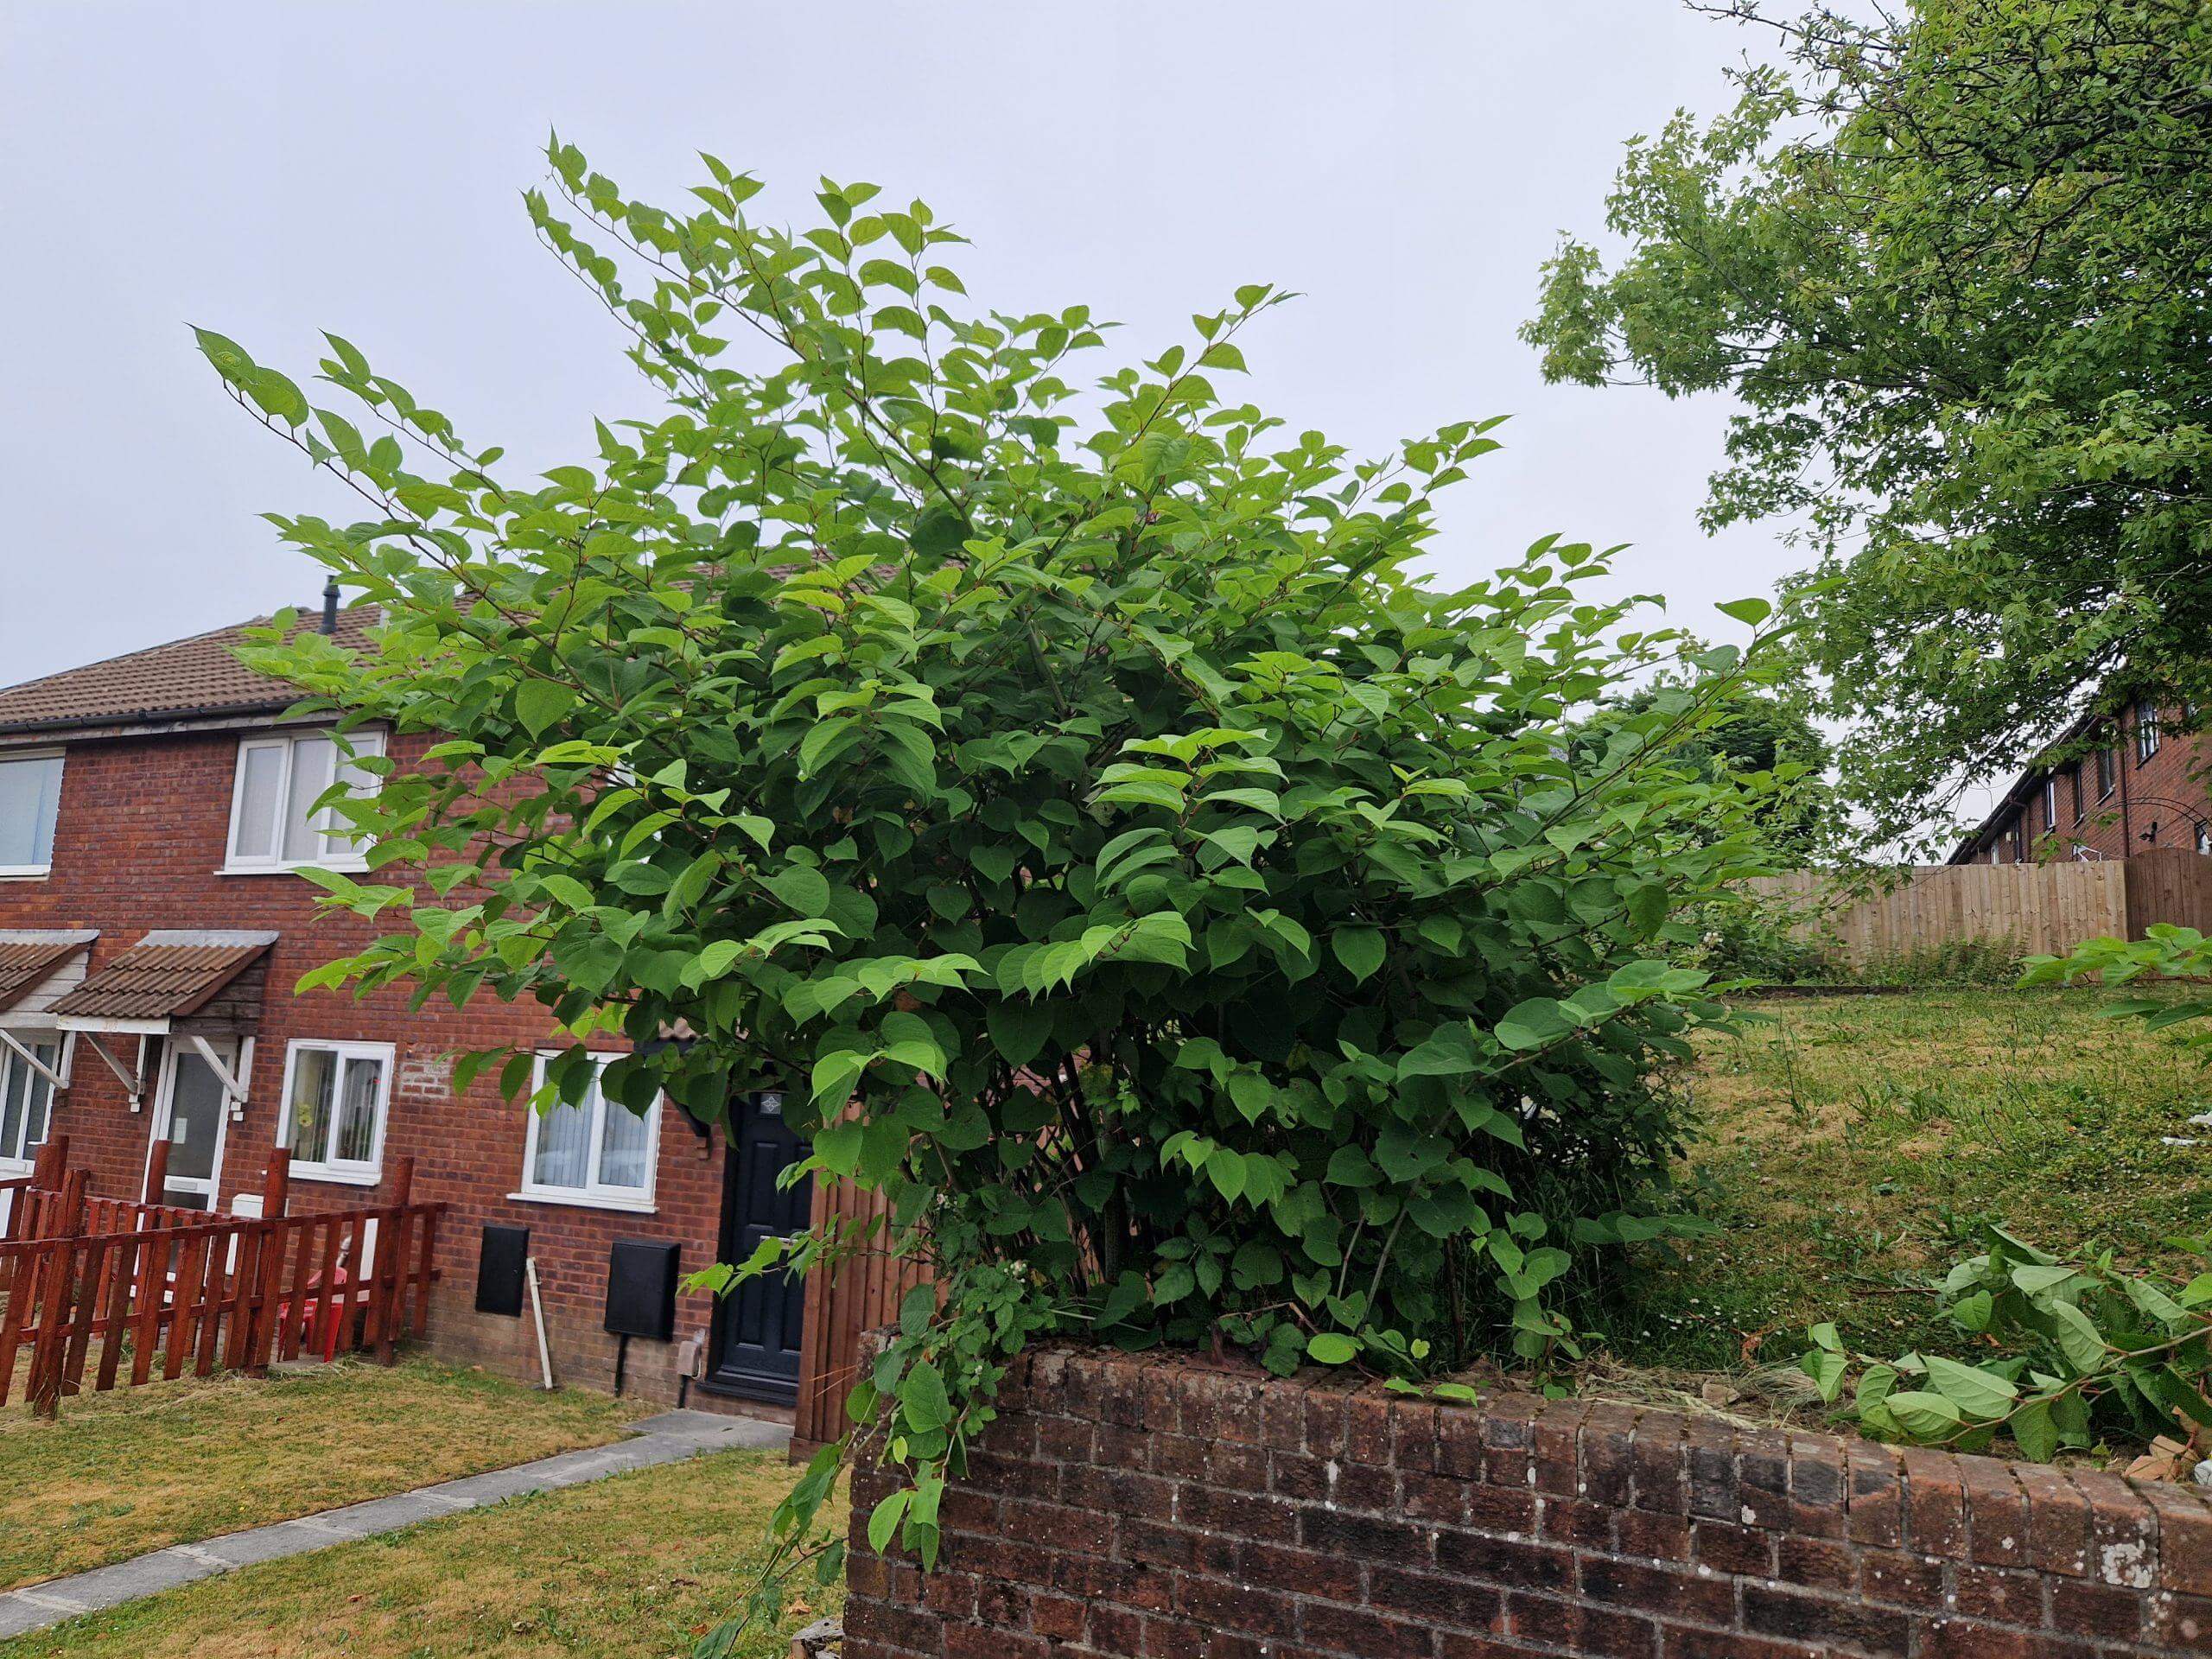 Japanese knotweed can and impact property values if left untreated